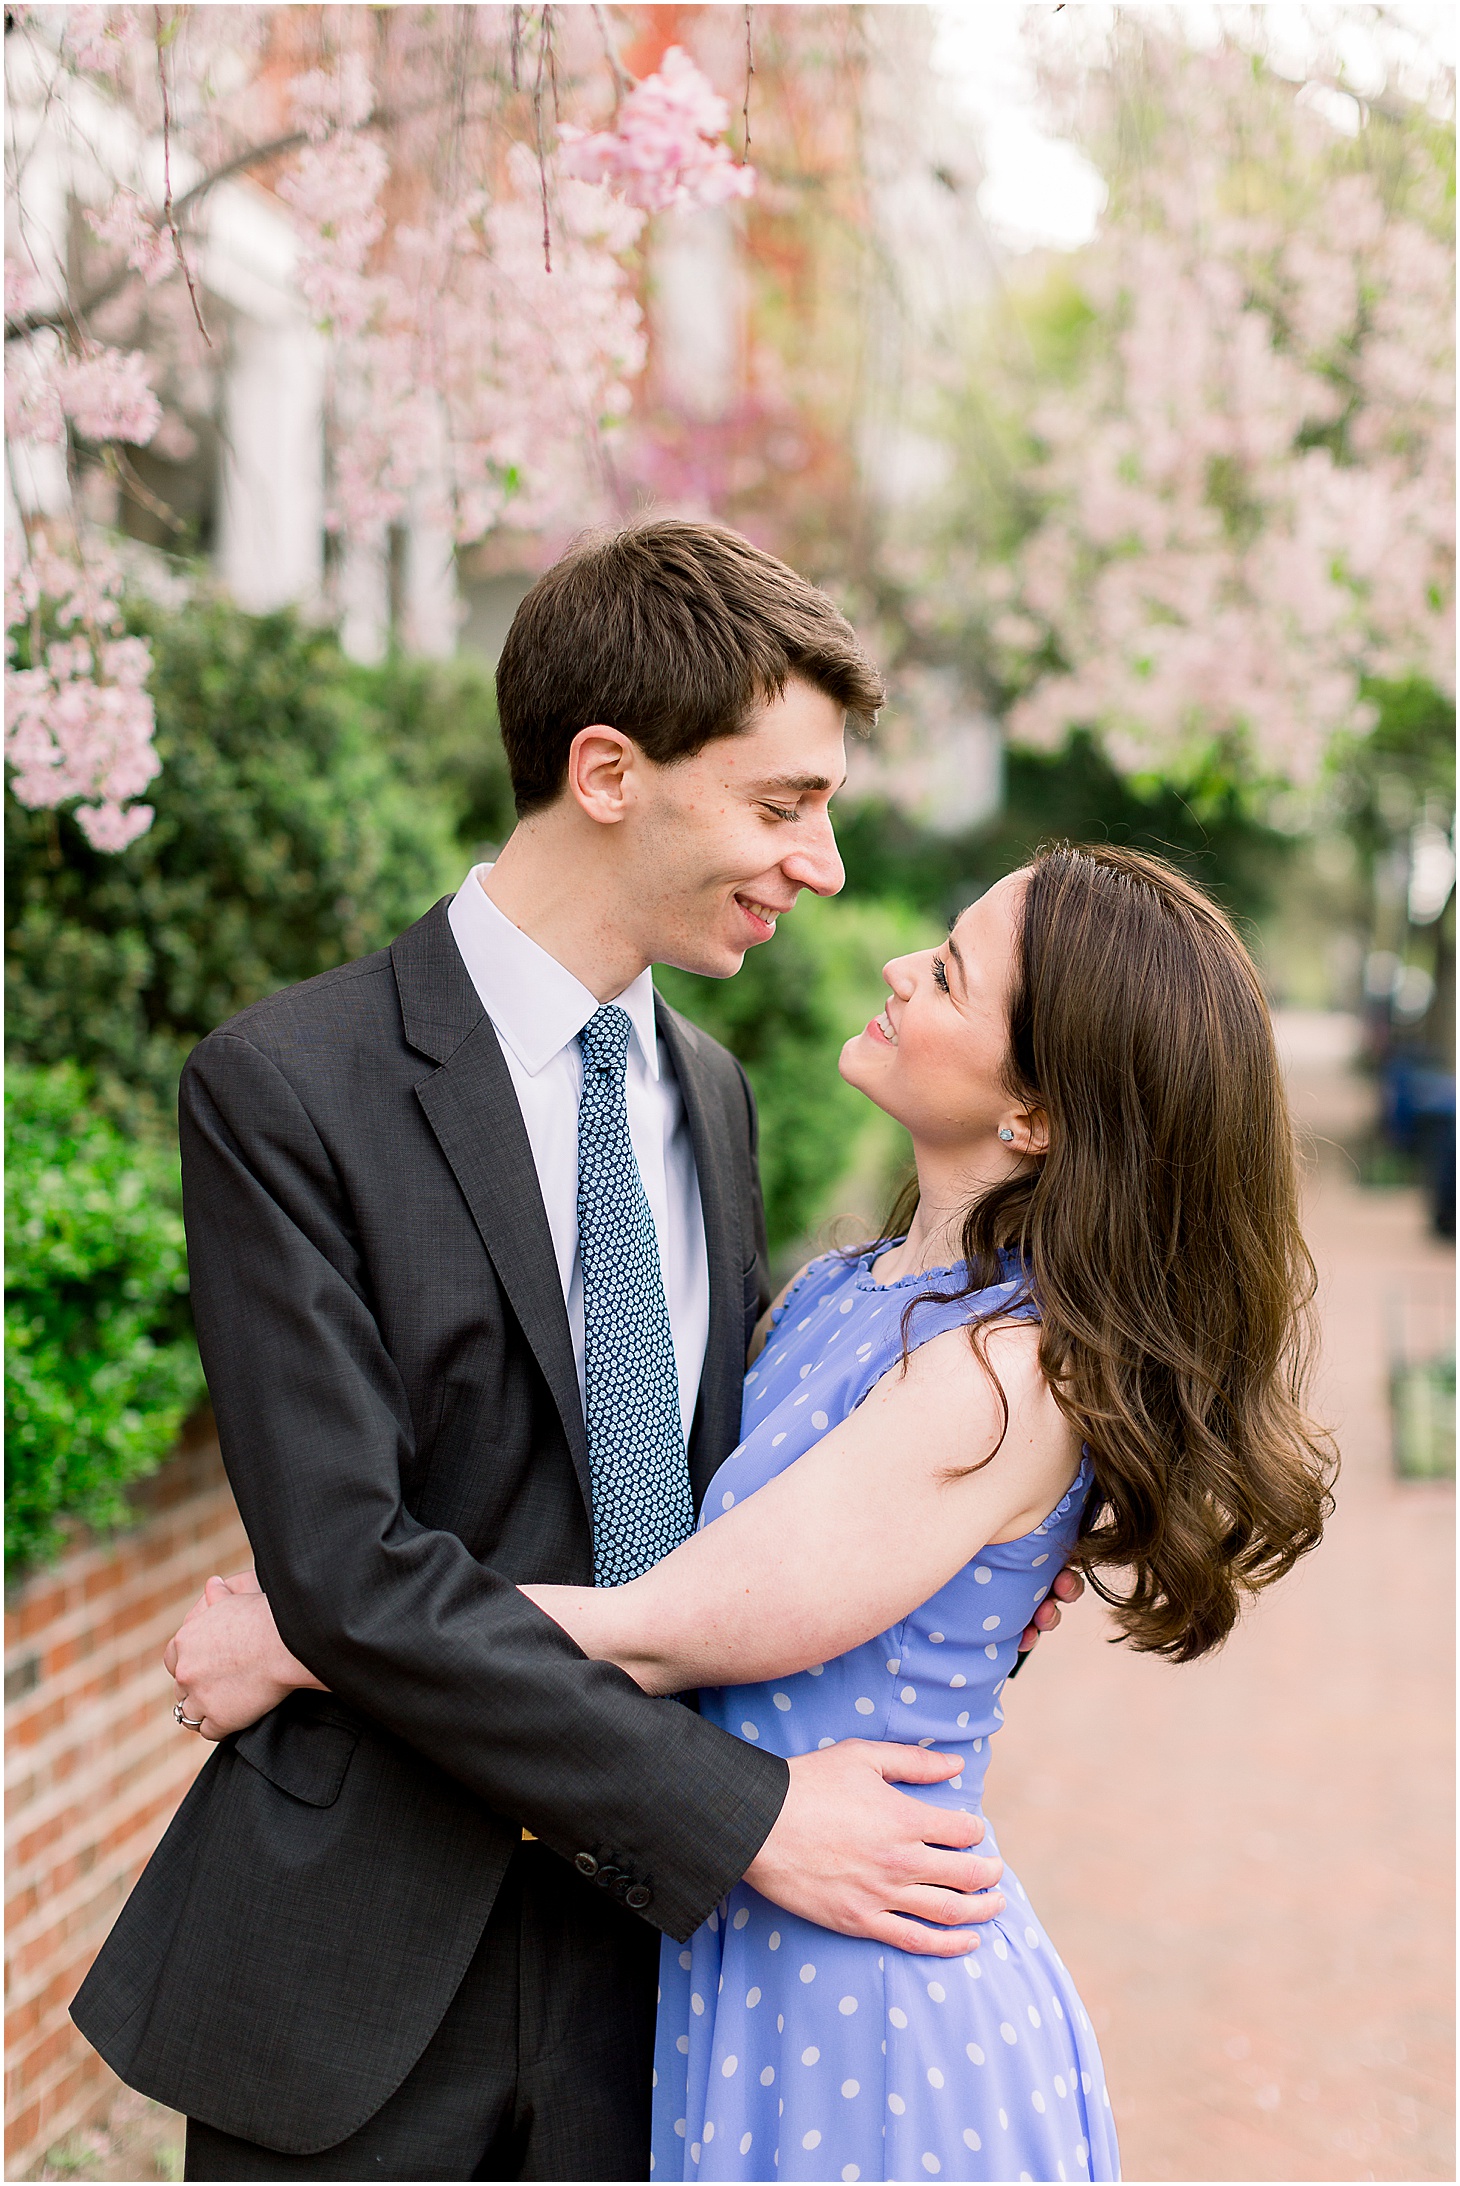 Engagement Portraits in Georgetown, Spring Blooms Engagement Session at the United States Supreme Court, Sarah Bradshaw Photography, DC Engagement Photographer